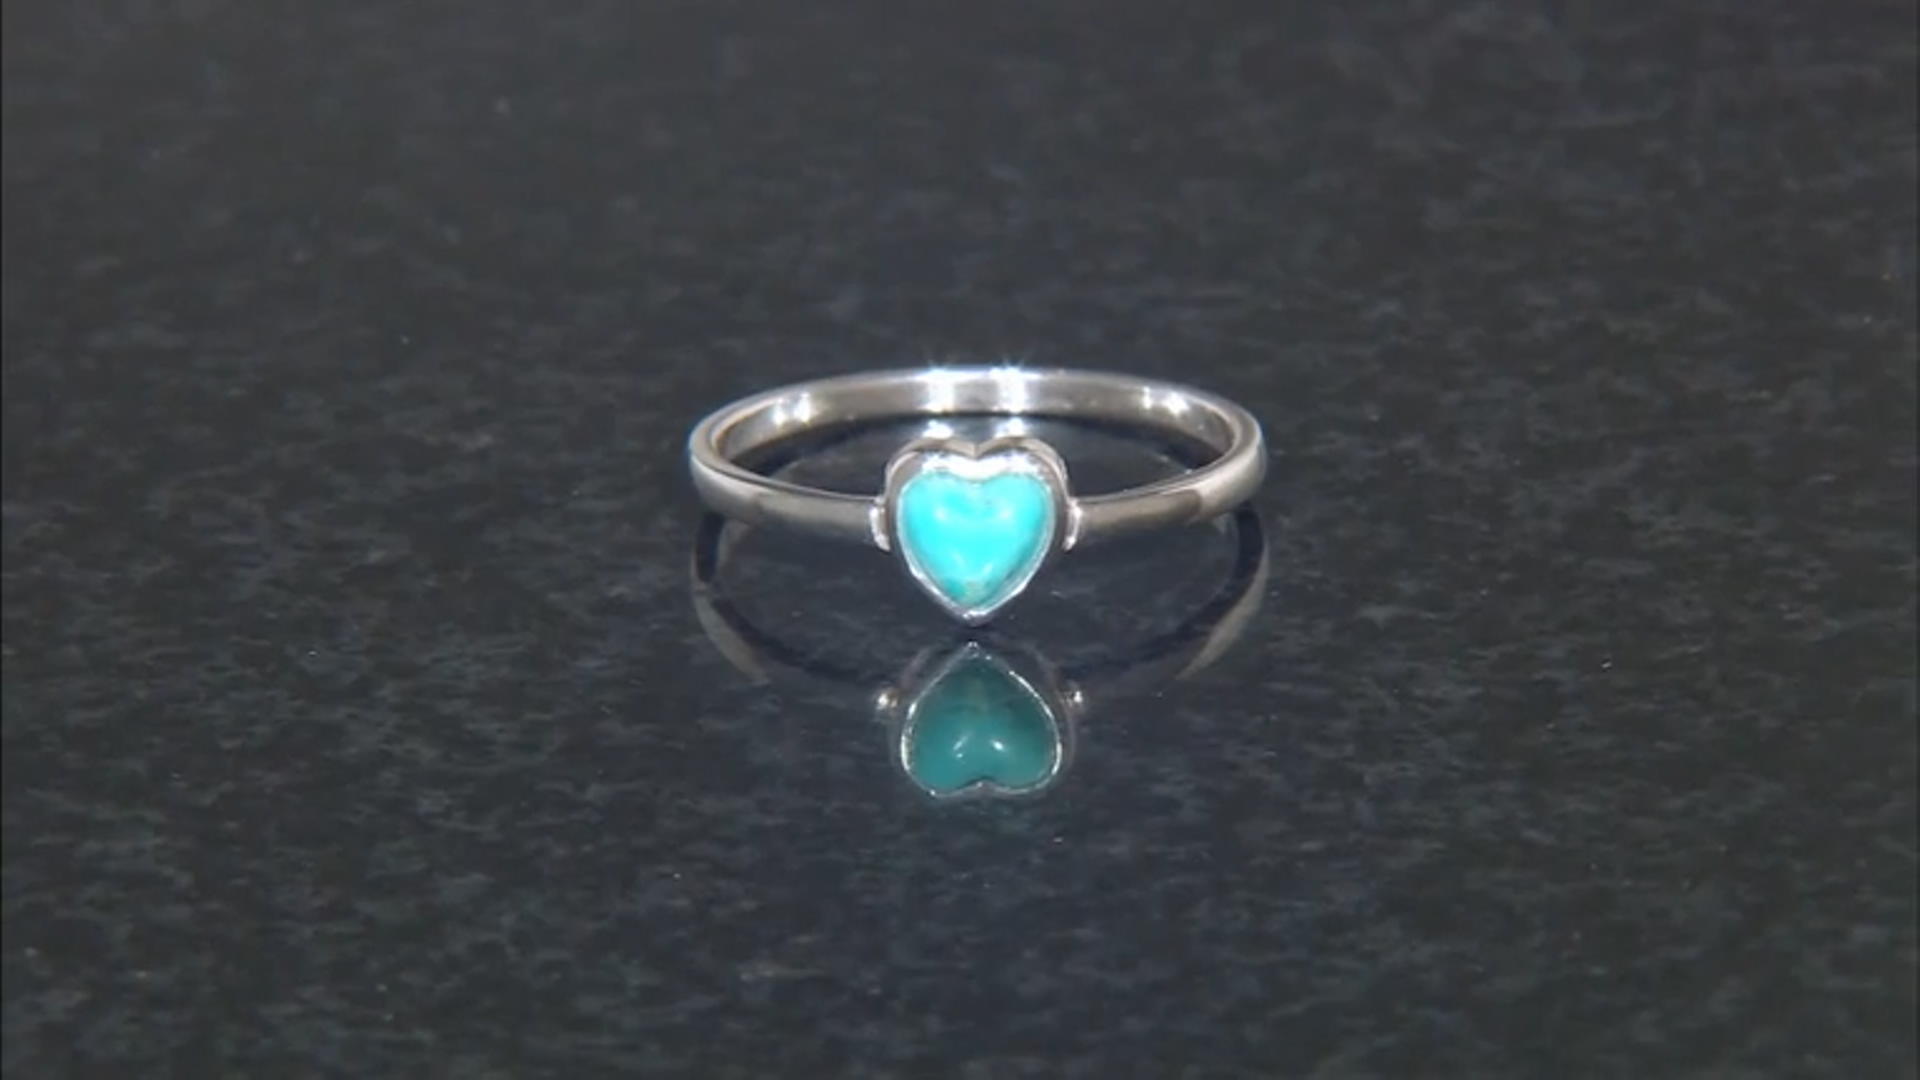 Blue Turquoise Sterling Silver Set of 3 Rings Video Thumbnail